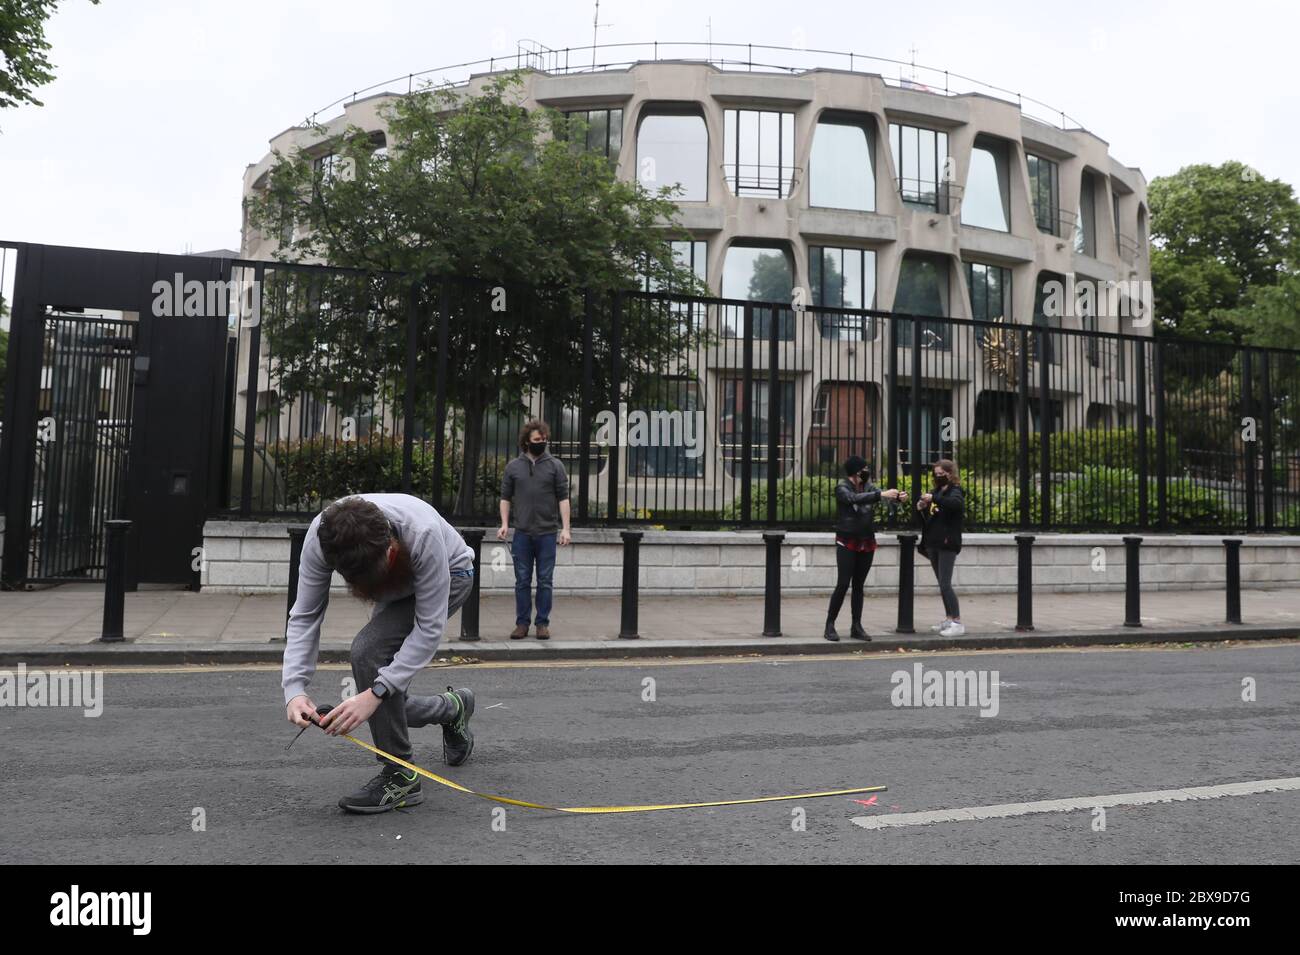 A man measures two metres to create marks outside the US Embassy in Dublin ahead of a Black Lives Matter protest rally, in memory of George Floyd who was killed on May 25 while in police custody in the US city of Minneapolis. Stock Photo